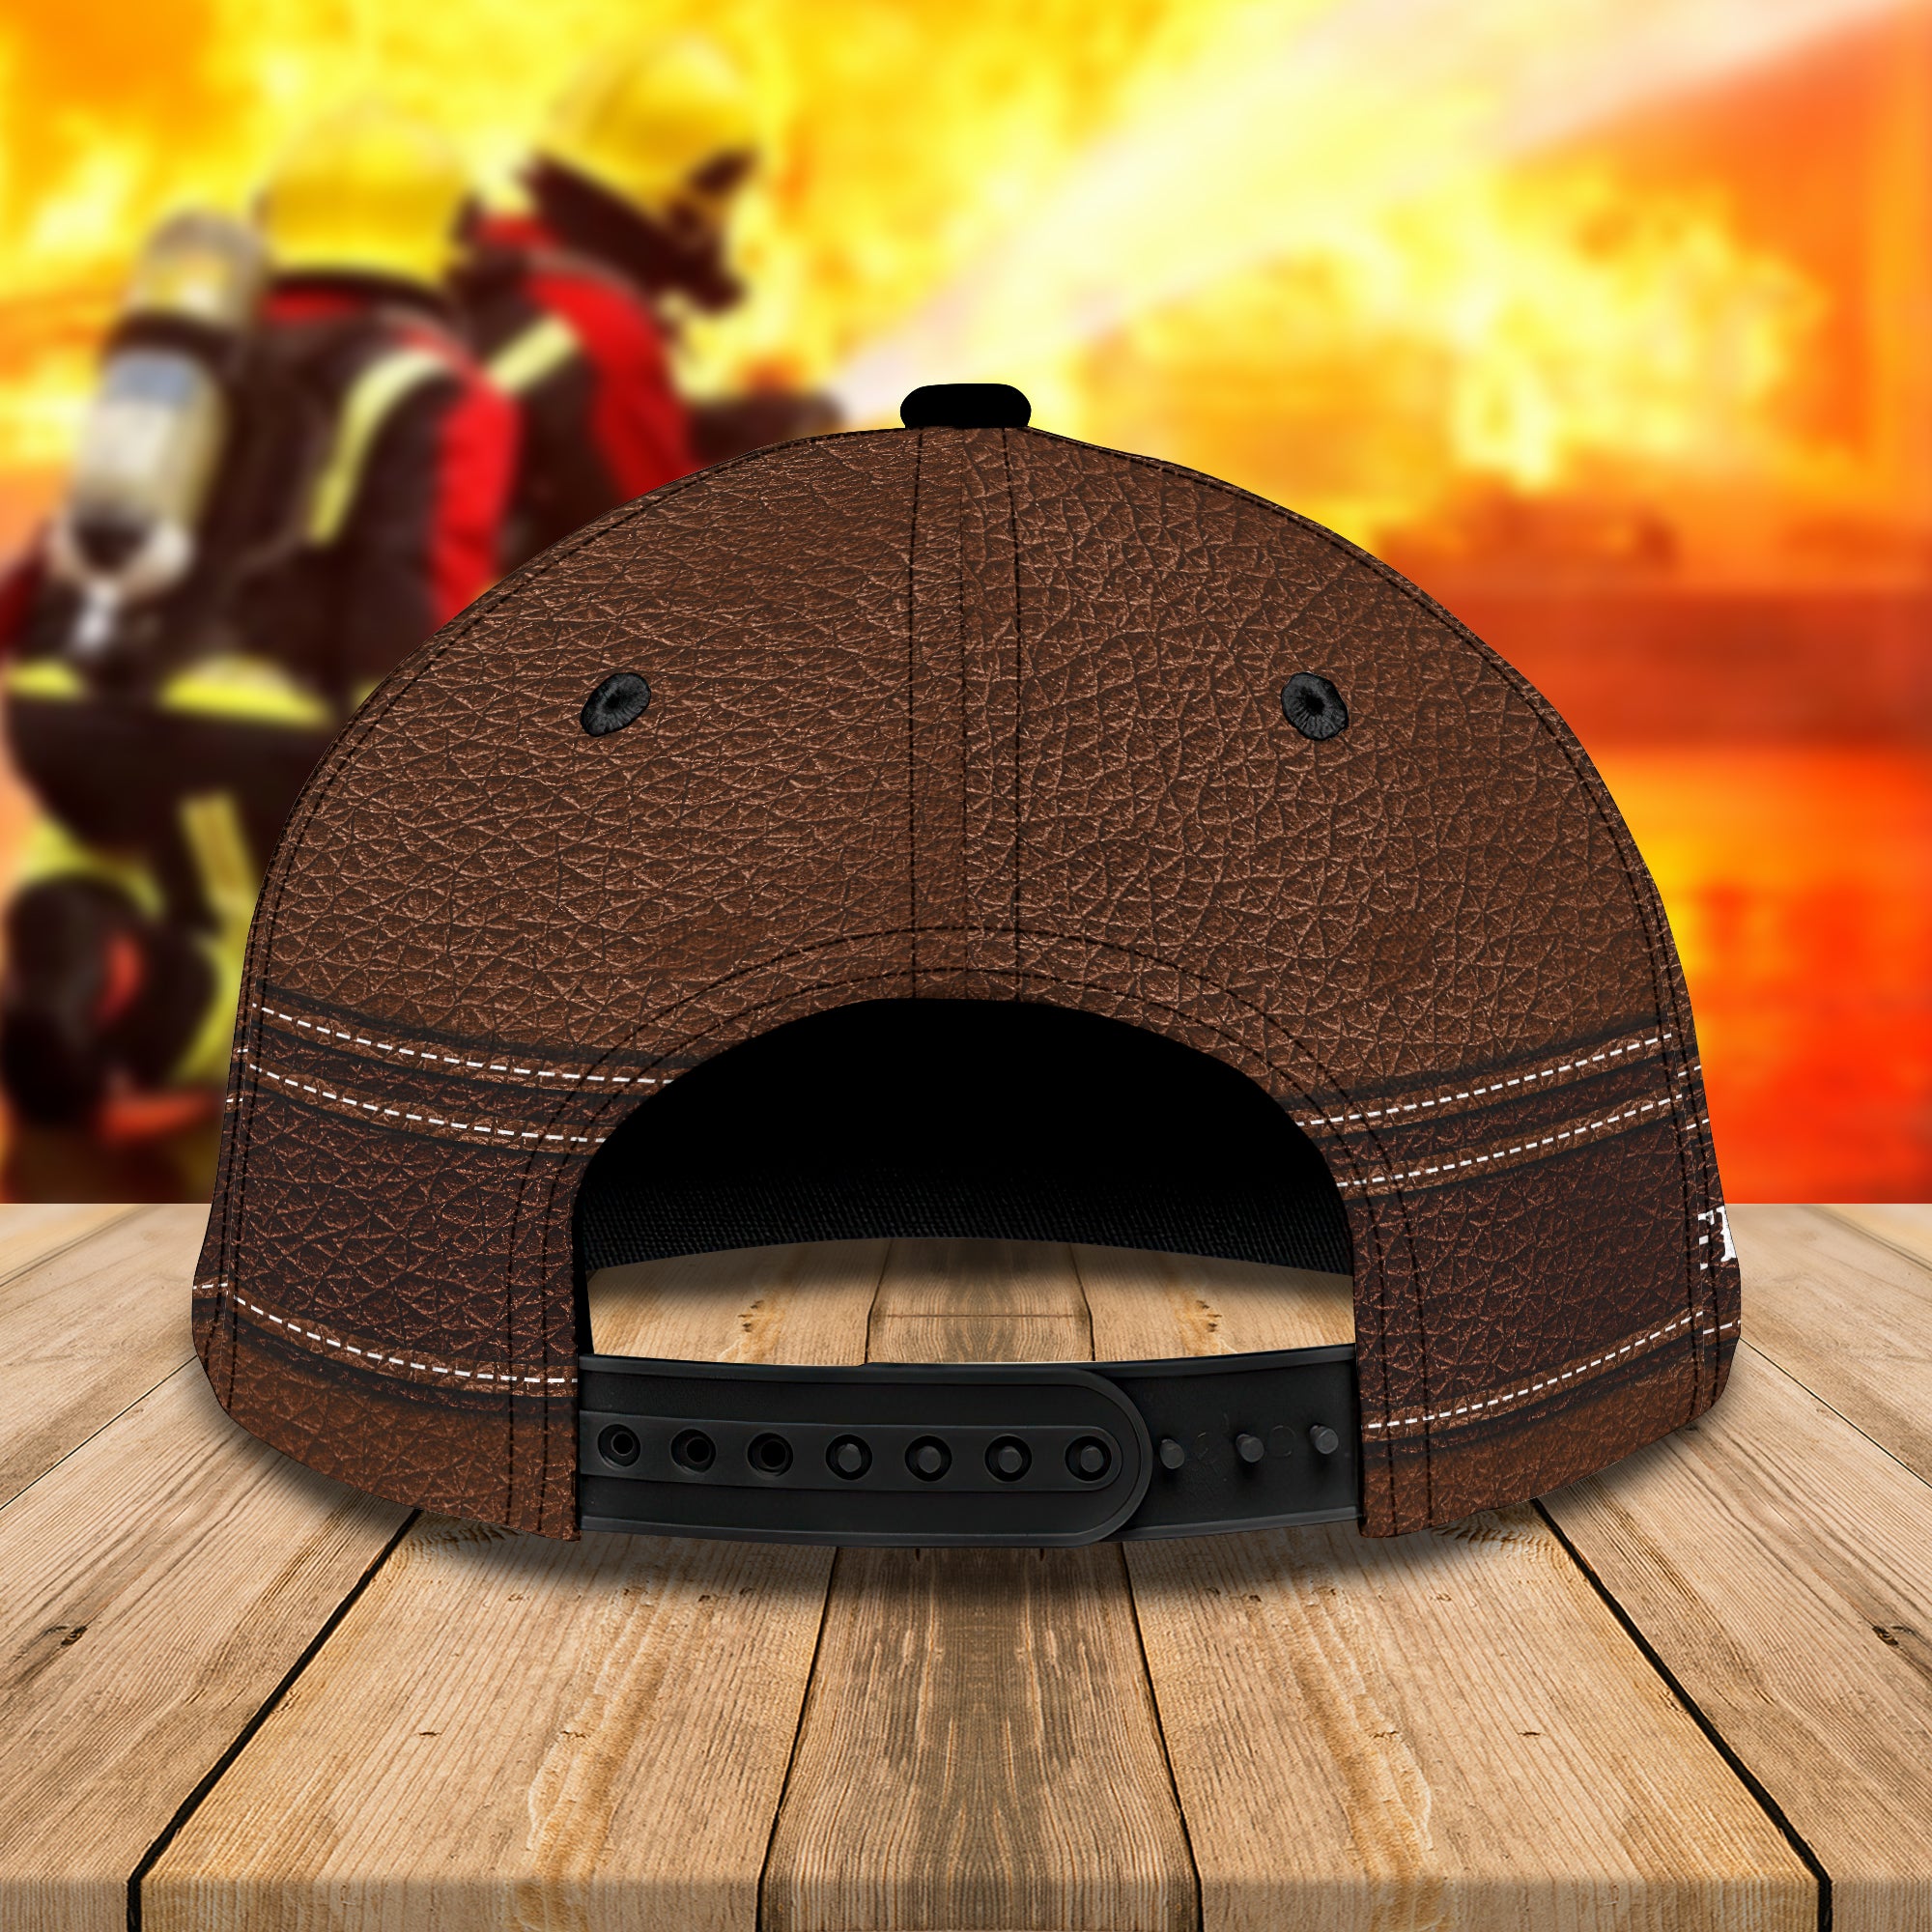 Firefighter - Personalized Name Cap 01 - Cv98